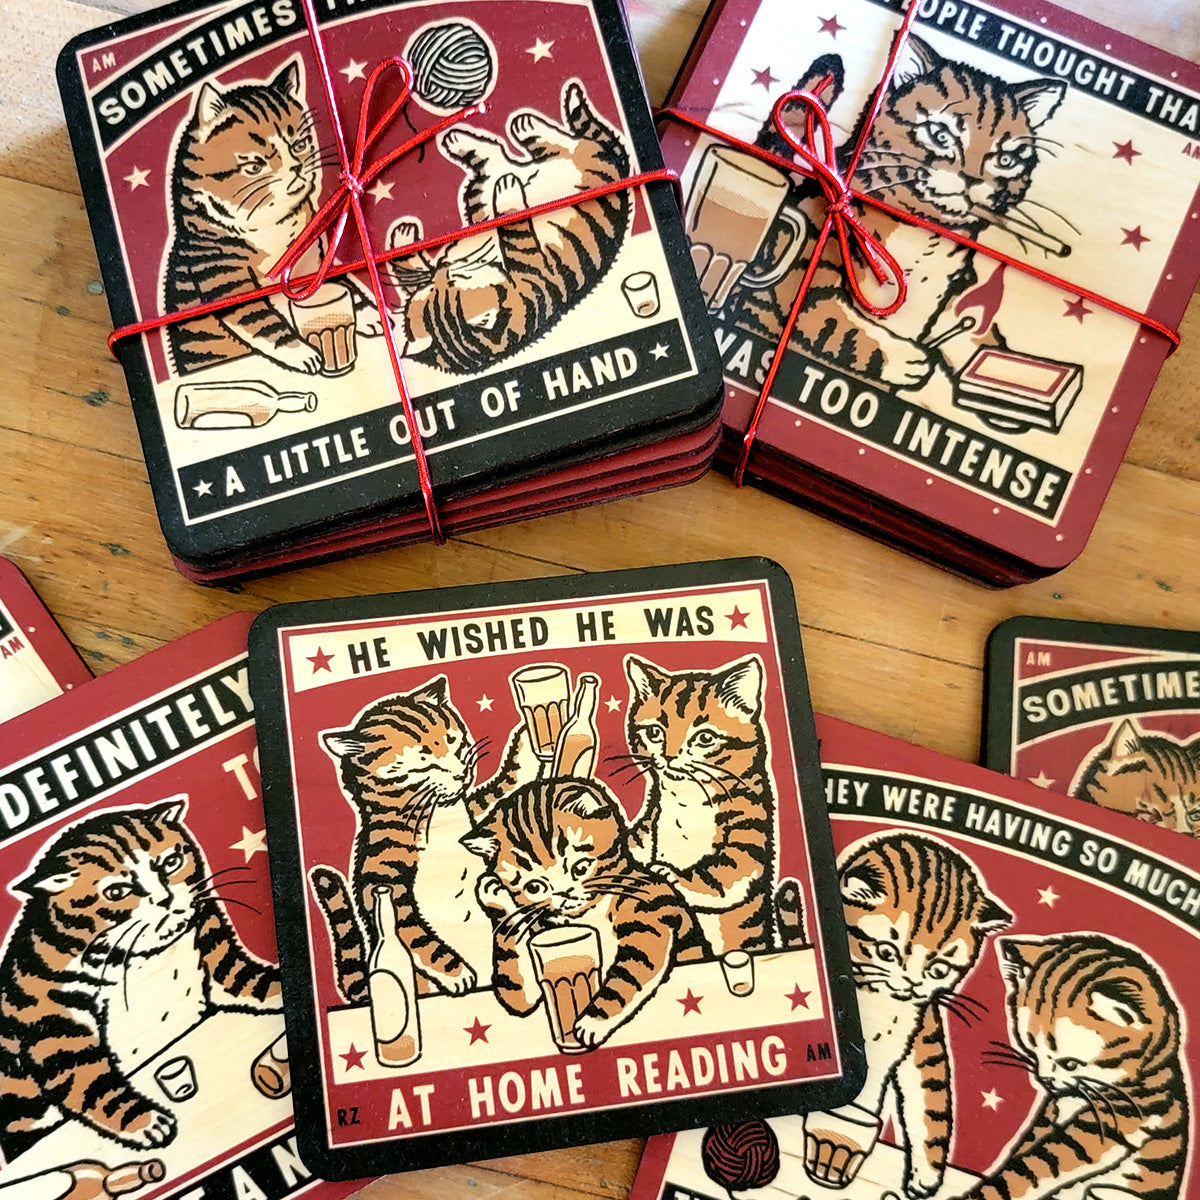 Not Alone Cat Coasters